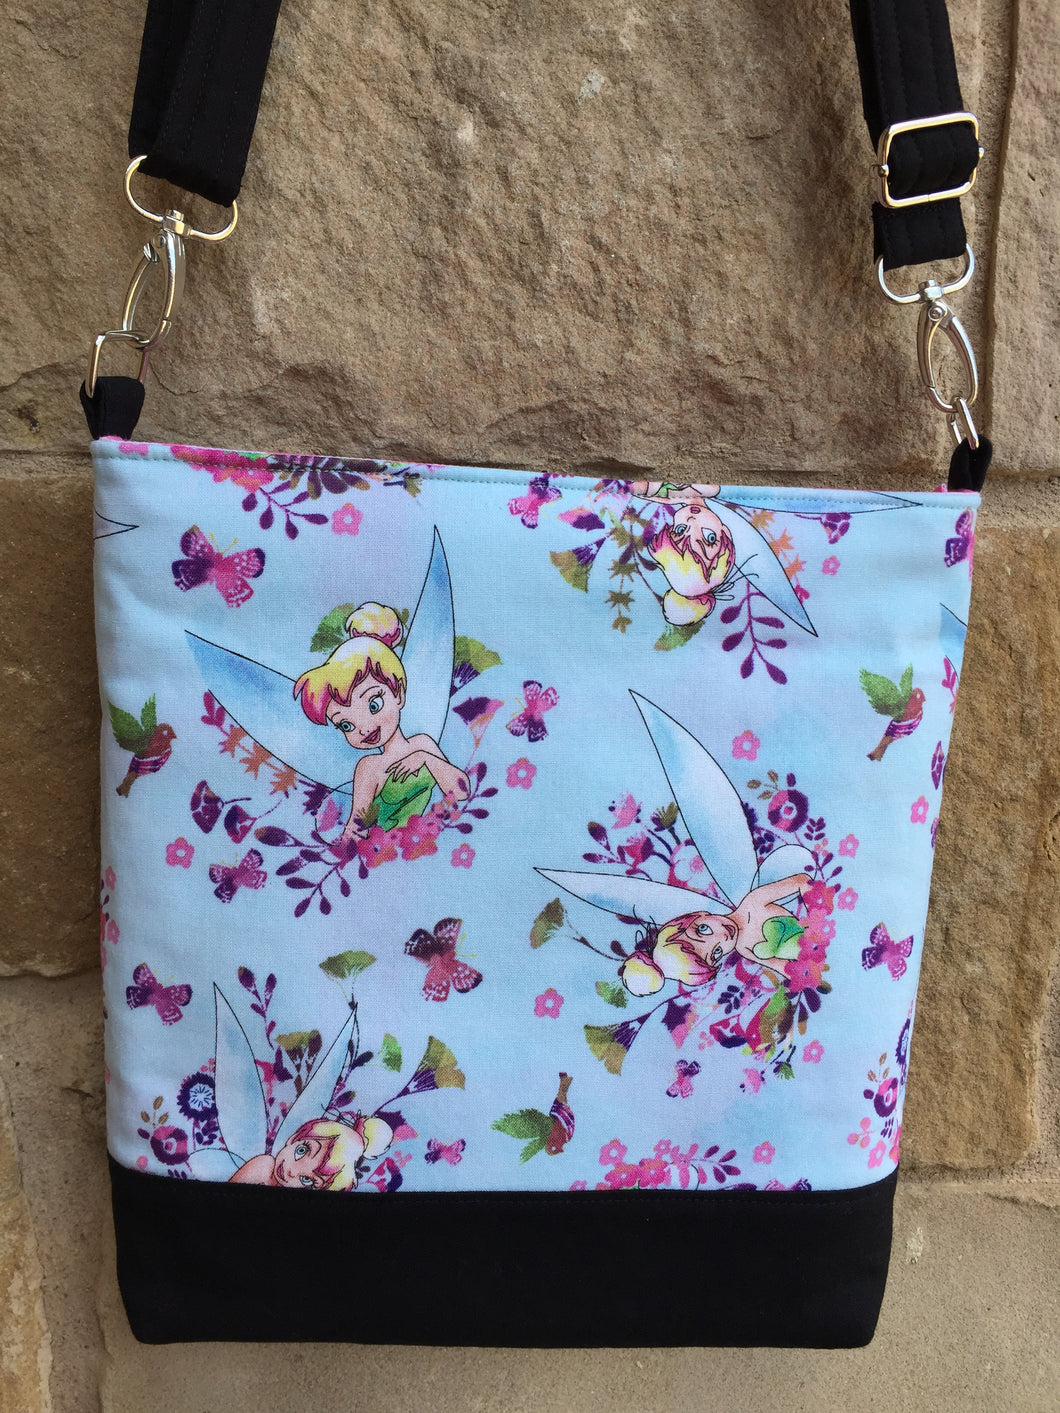 Messenger Bag Made With Licensed Fairy Fabric - Adjustable Strap - Zippered Closure - Zippered Pocket - Cross Body Bag